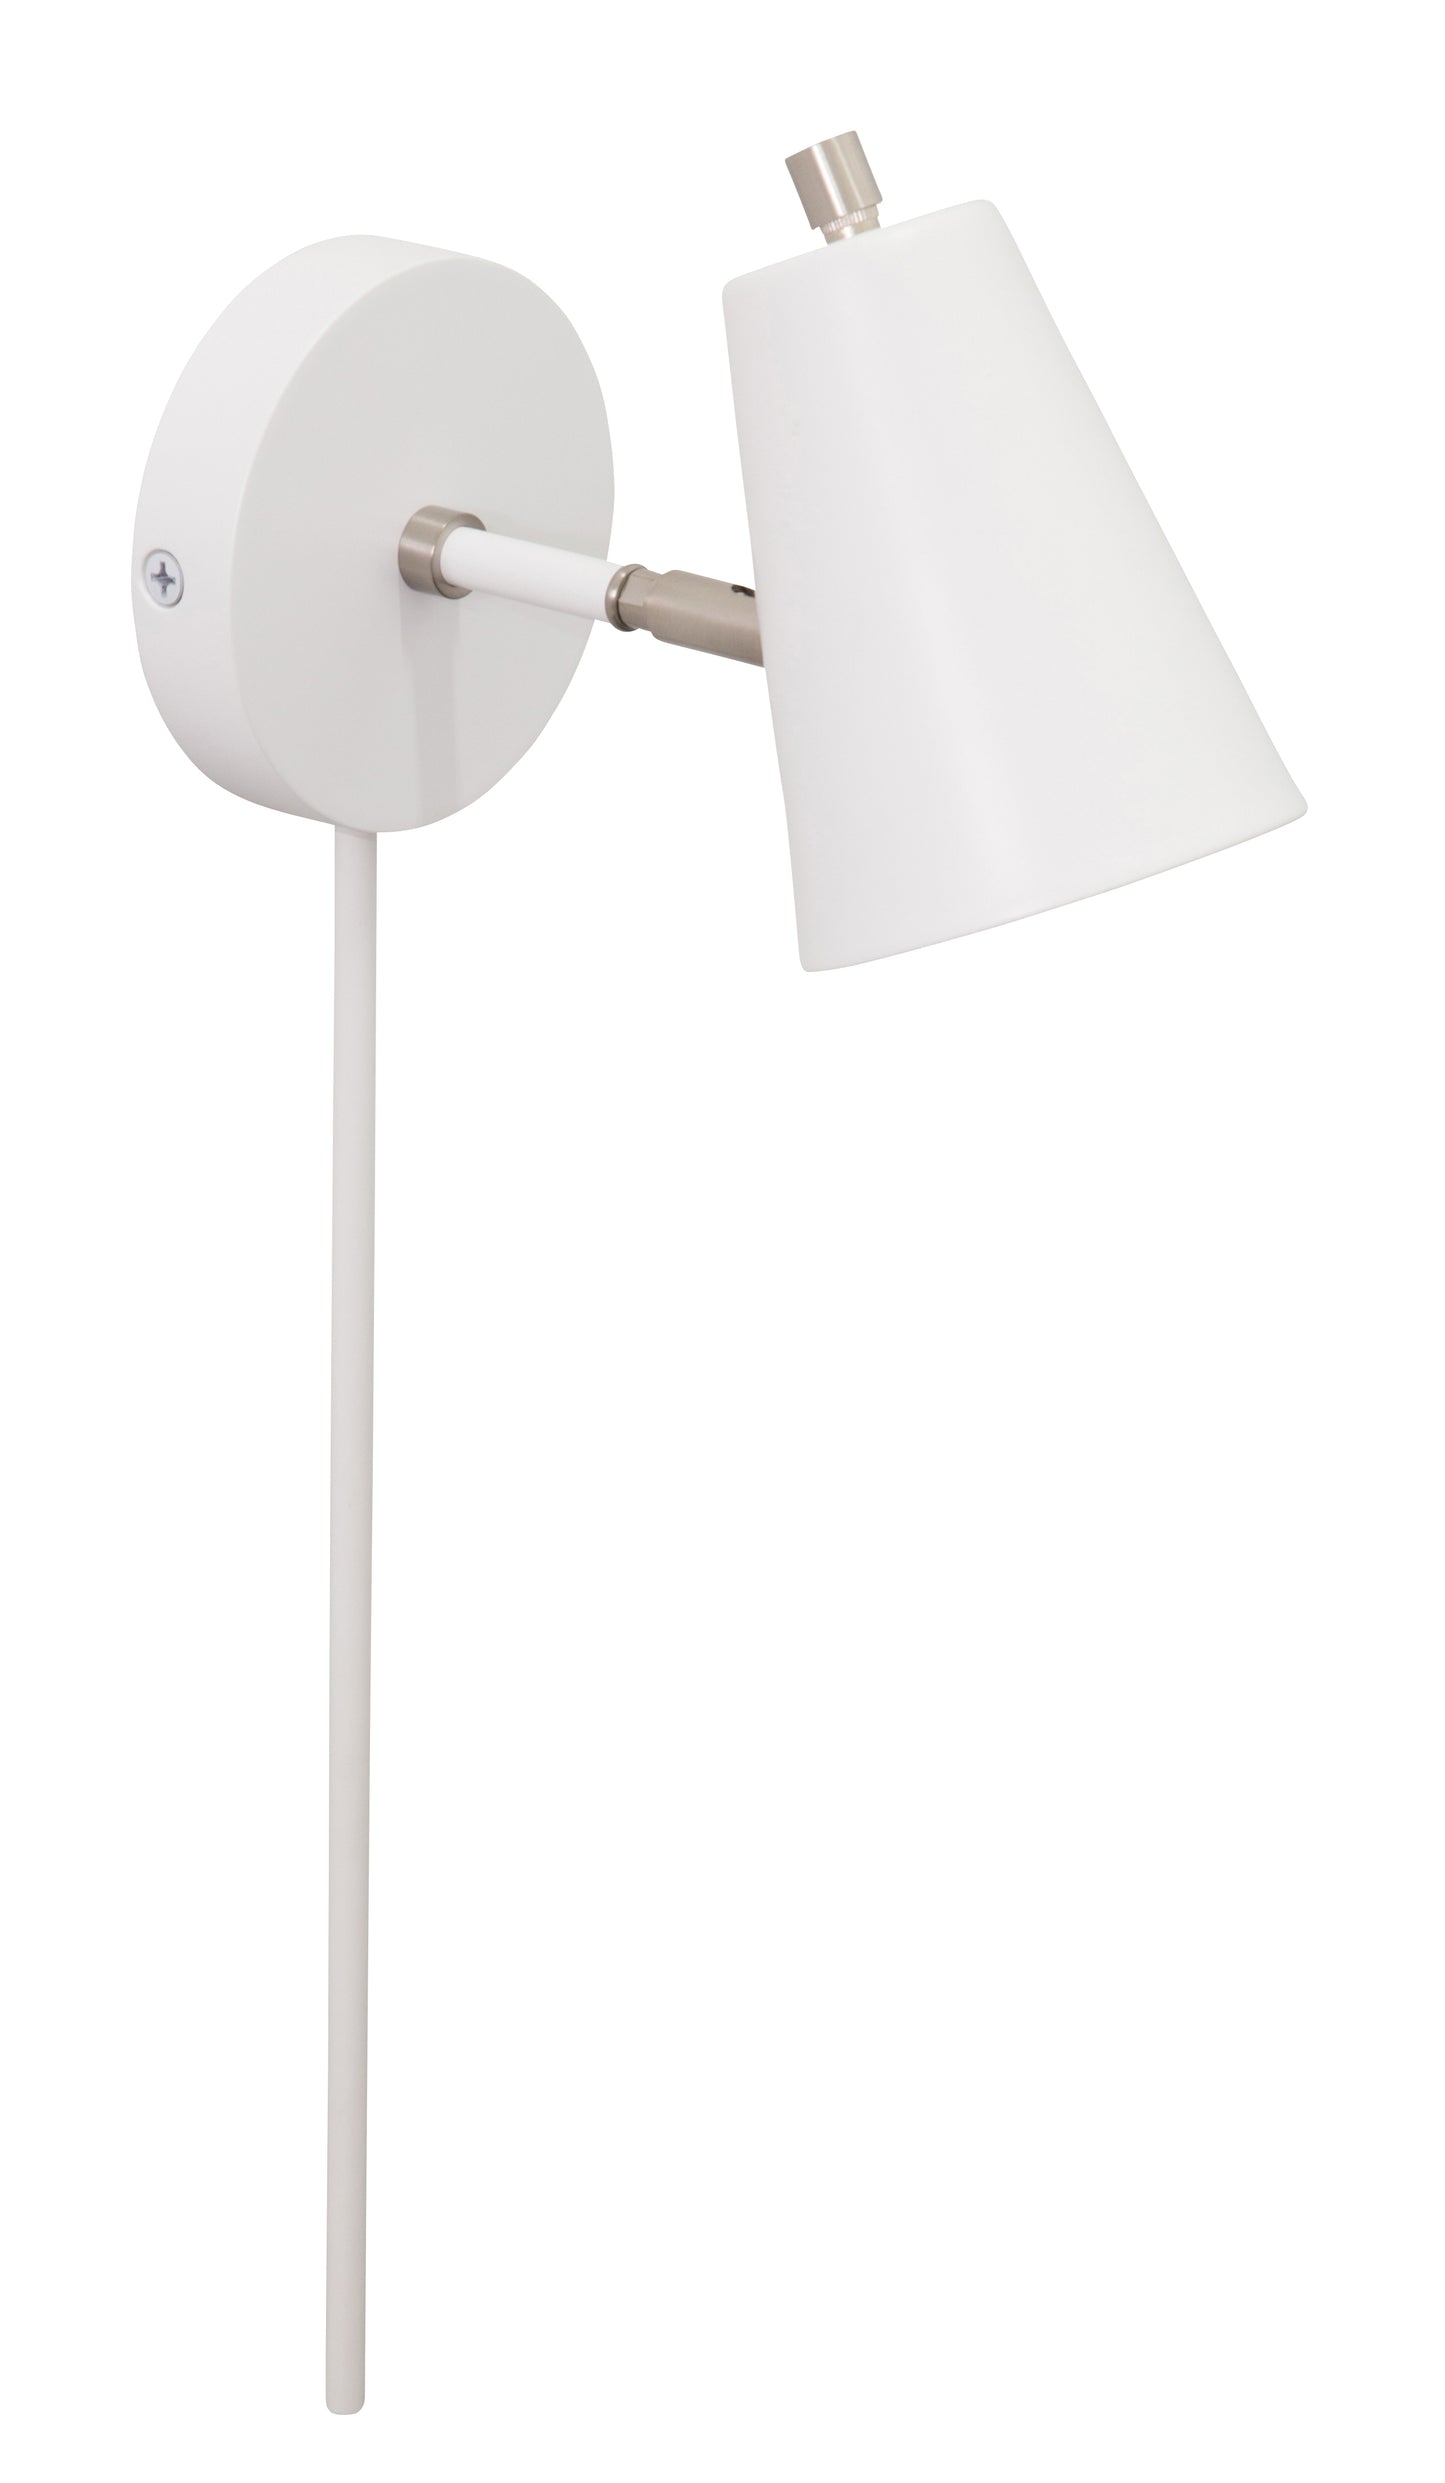 House of Troy Kirby LED Wall Lamp White Satin Nickel Accents K175-WT